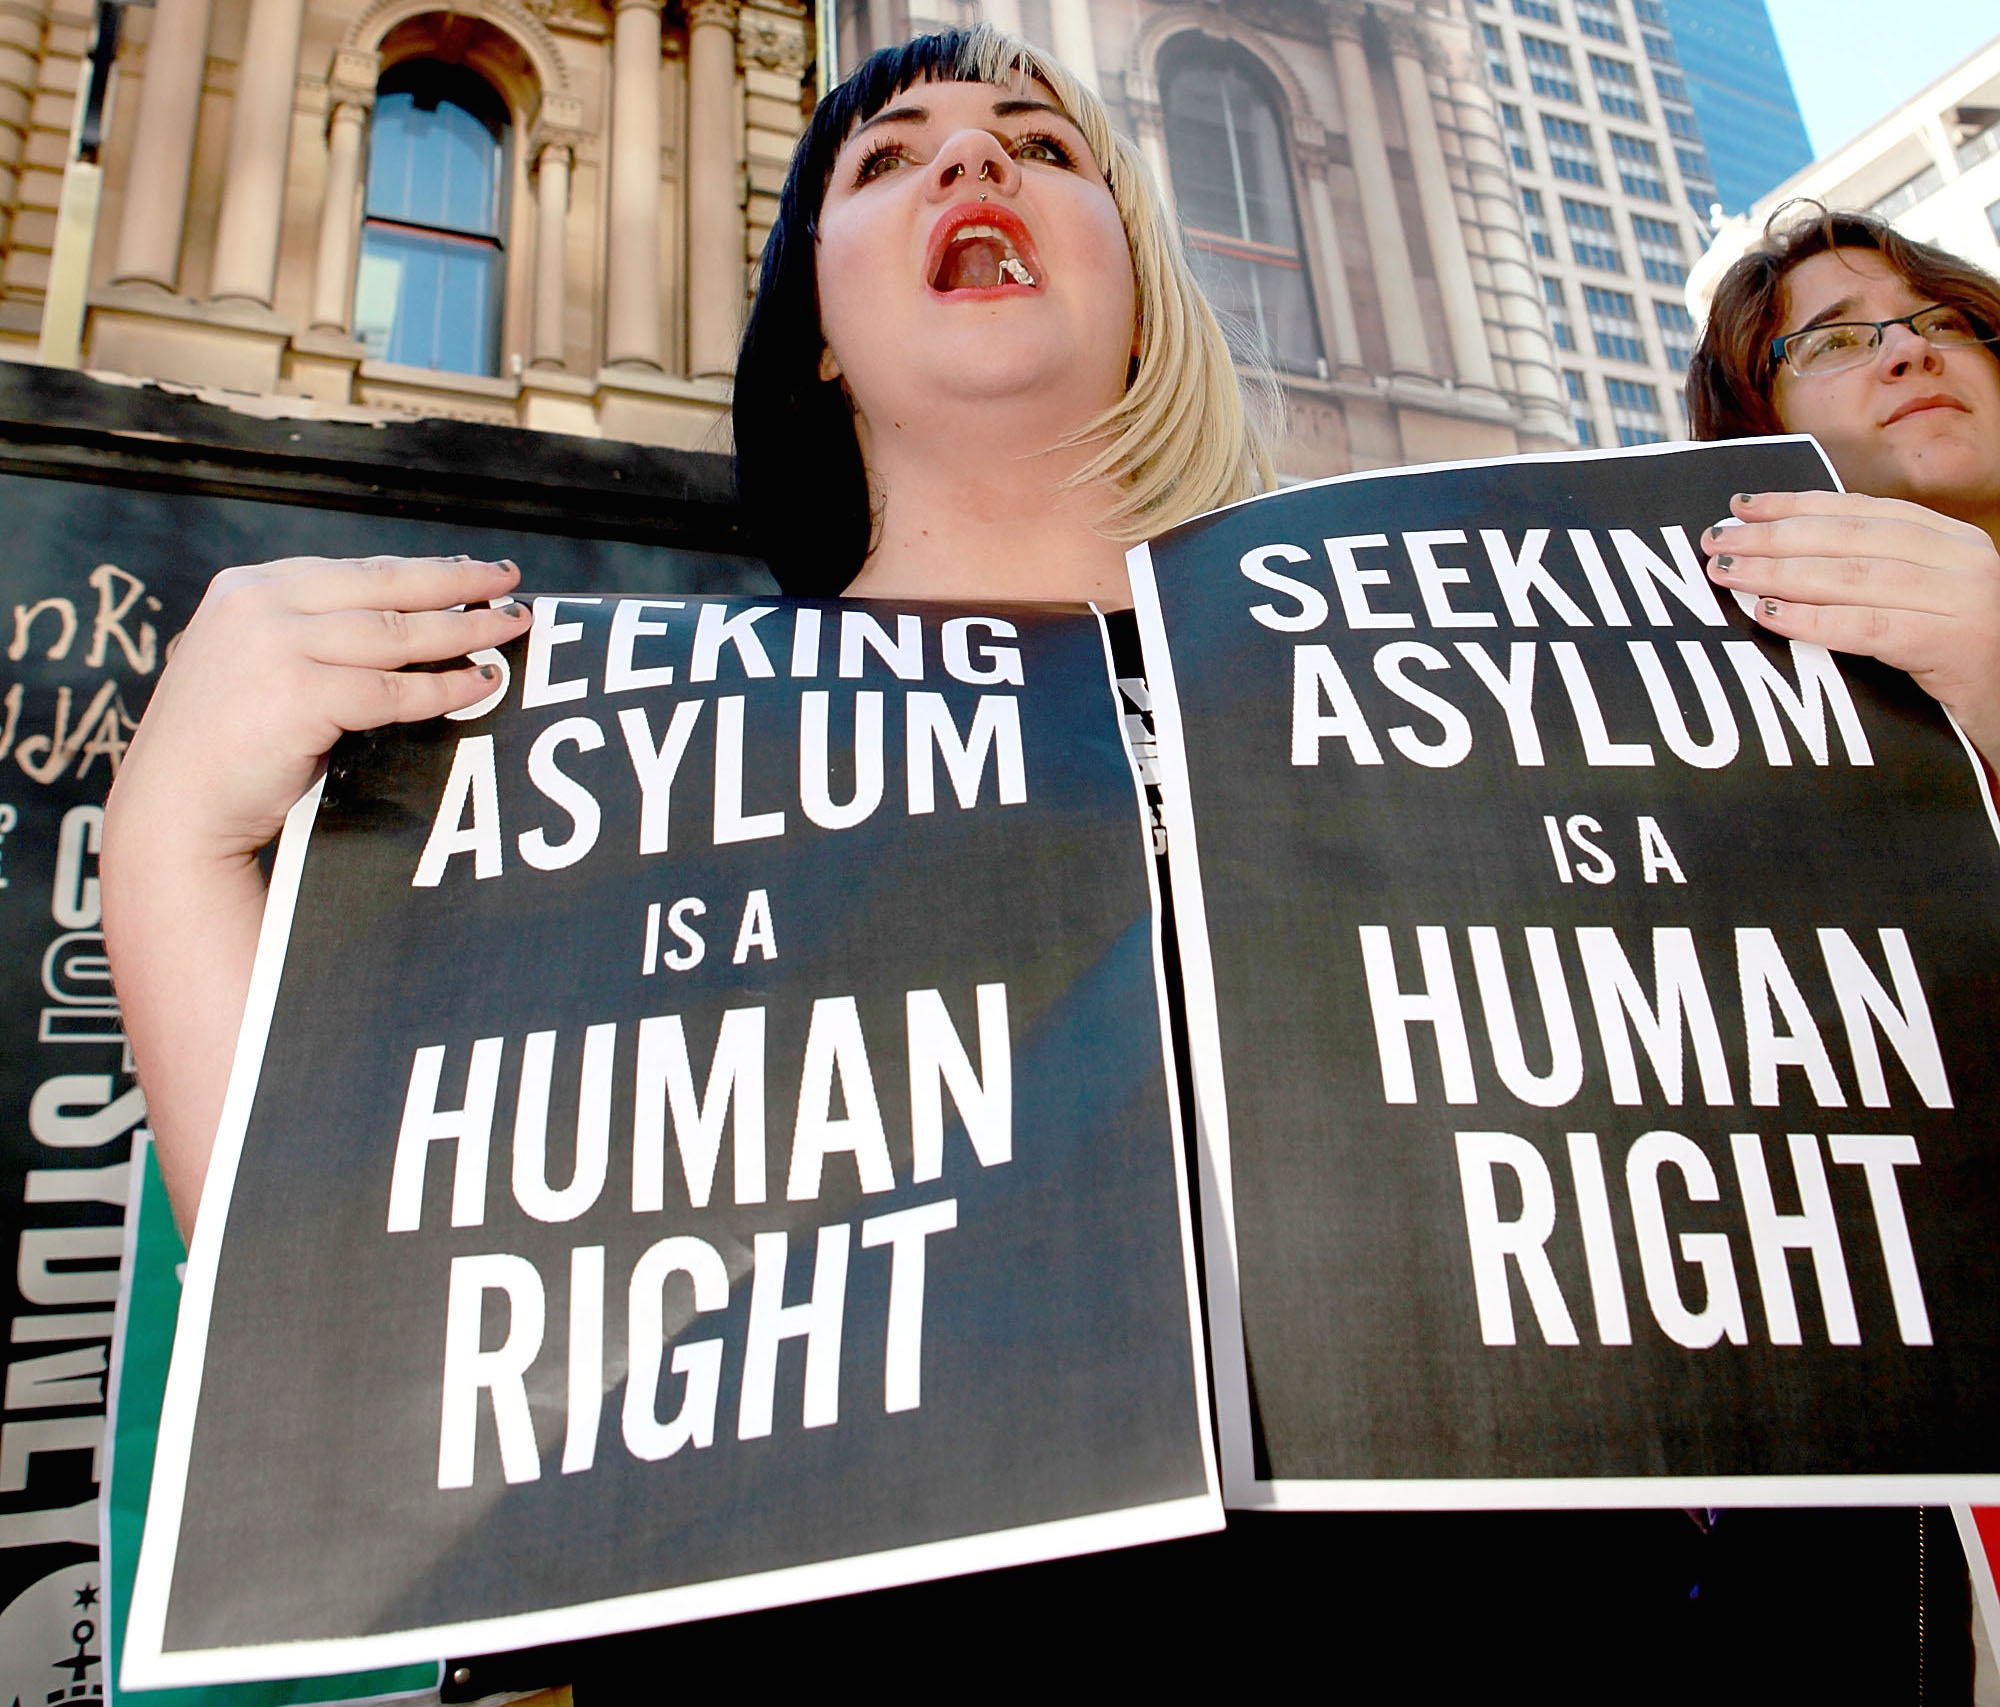 <> on July 20, 2013 in Sydney, Australia. The Australian government yesterday announced all future boat arrivals by asylum seekers will be sent to Papua New Guinea for processing and settlement. The announcement marks a major shift in policy direction by the centre-left Australian Labor Party government.